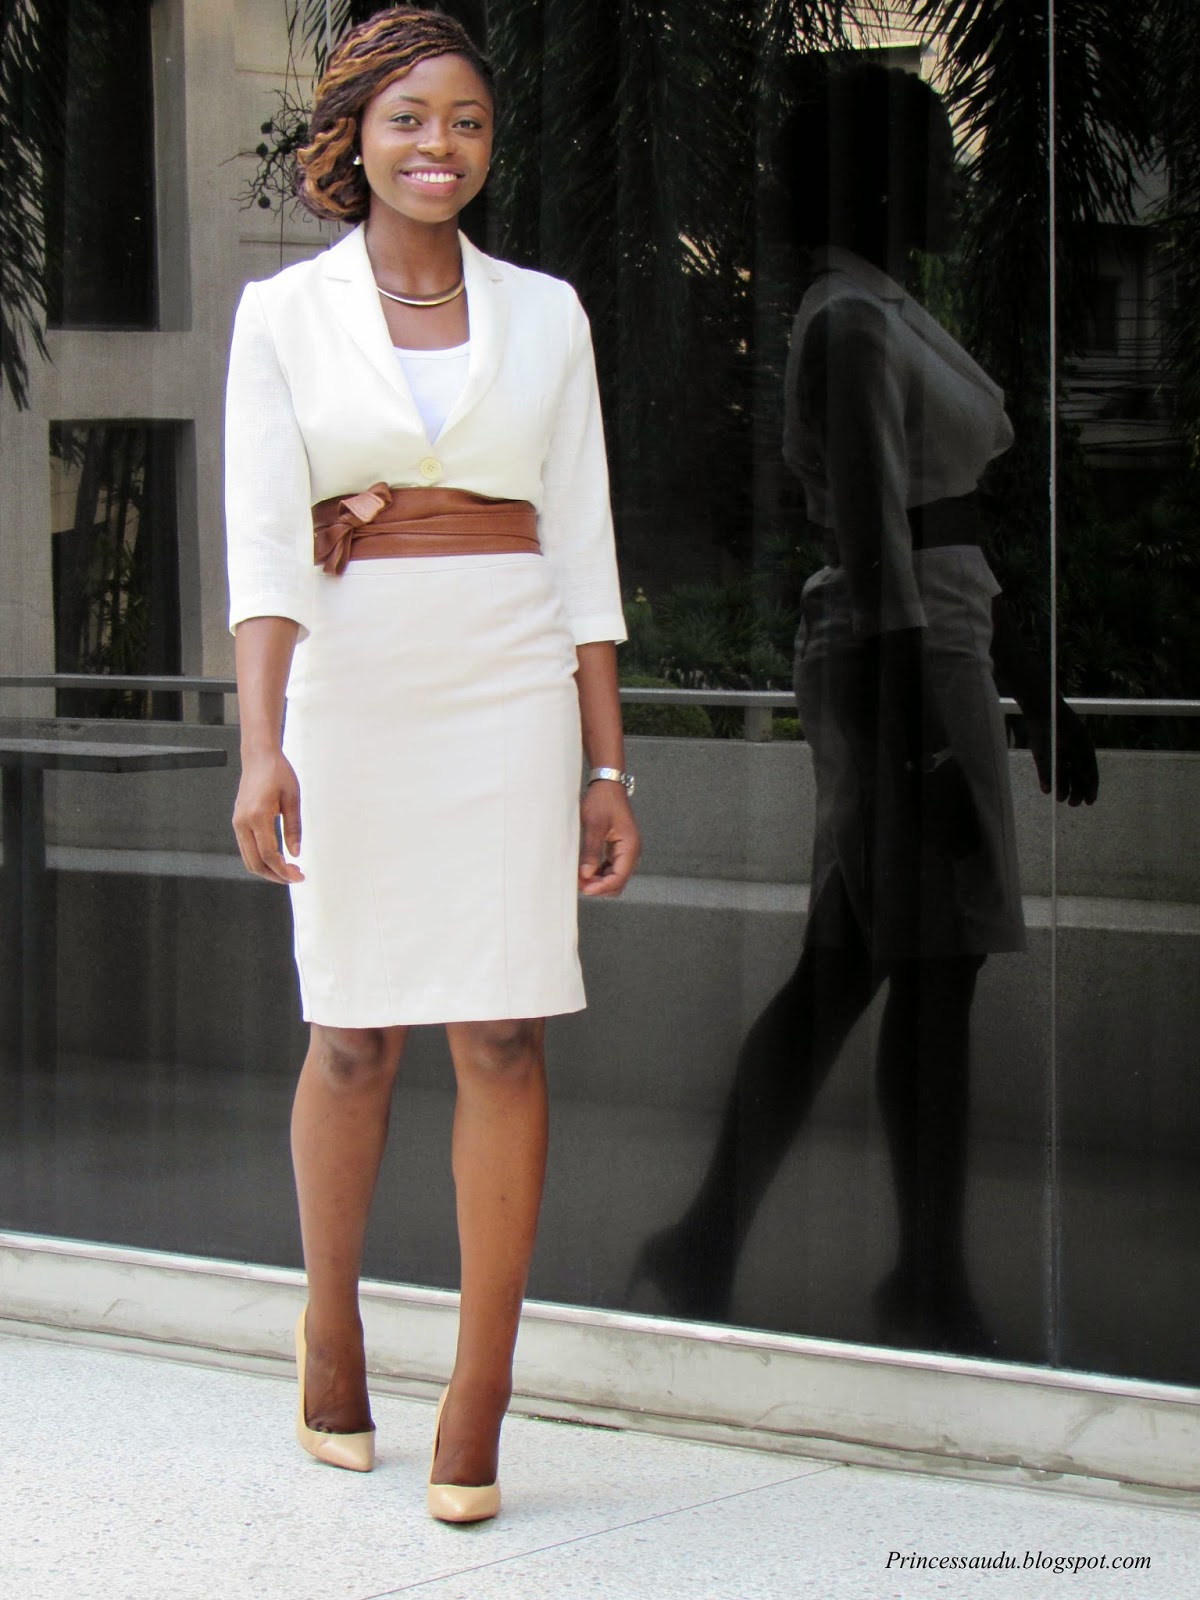 How To Dress For Success As A Professional Working Woman